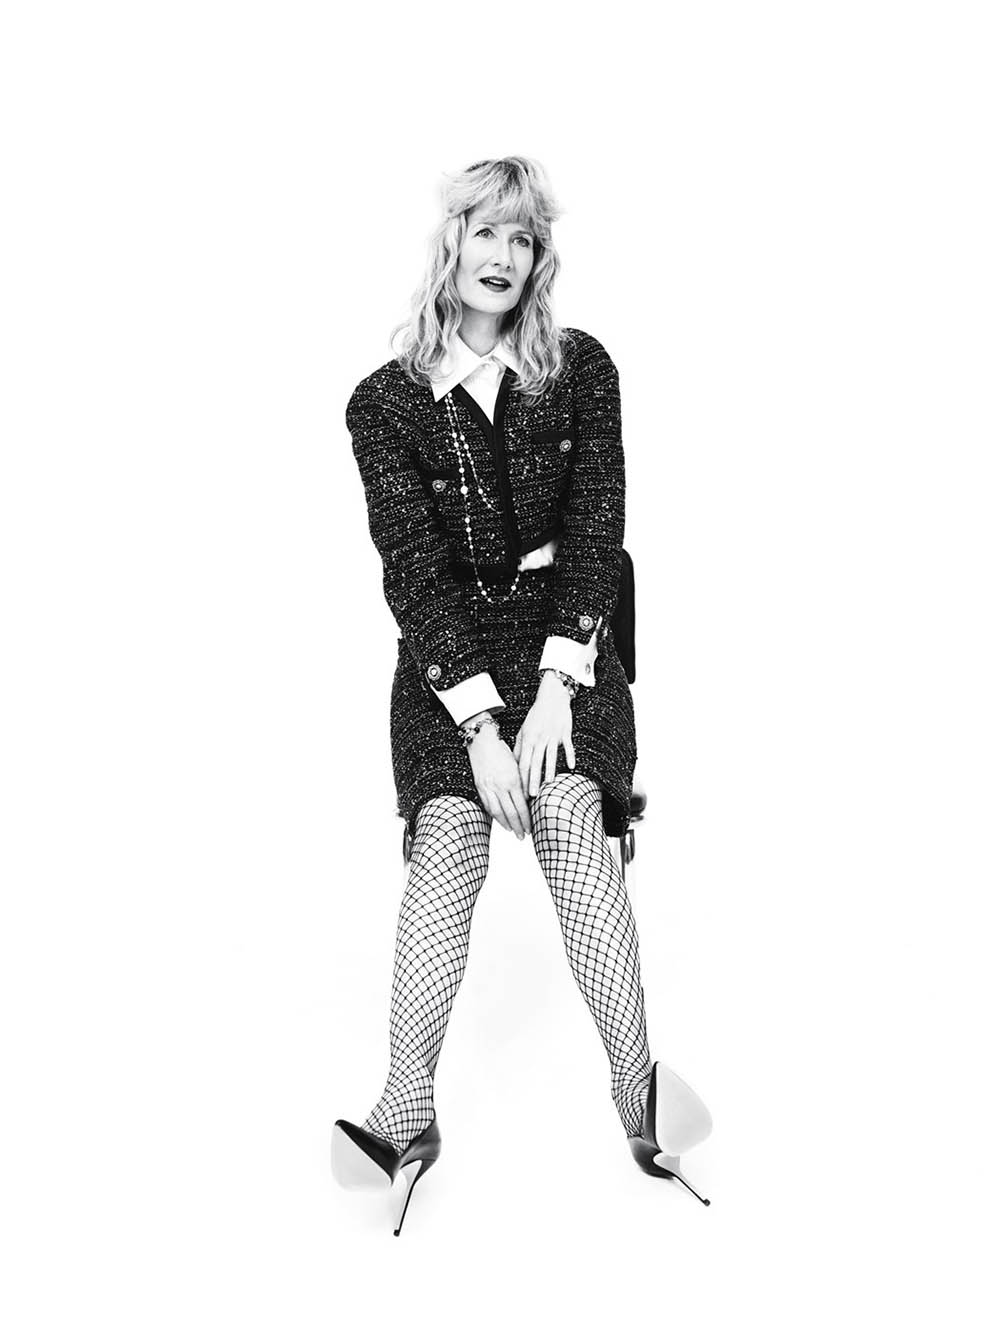 Laura Dern covers AnOther Magazine Spring Summer 2020 by Willy Vanderperre